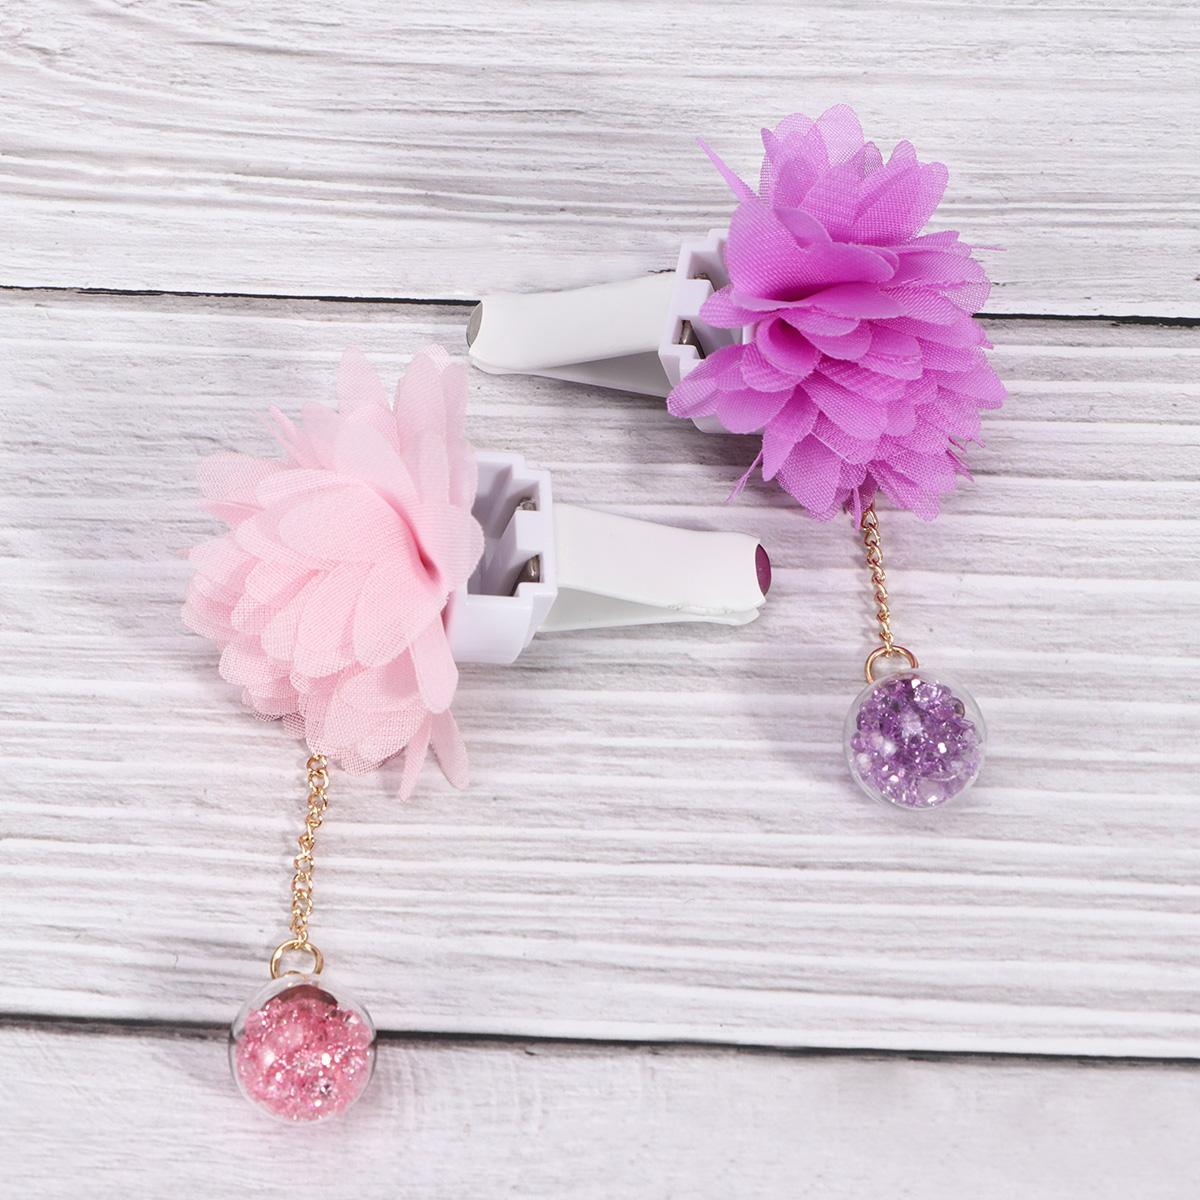 2pcs Car Perfume Clip Flower Shape Tassels Aromatherapy Diffuser Solid Perfume Air Outlet Clip for Auto Vehicle